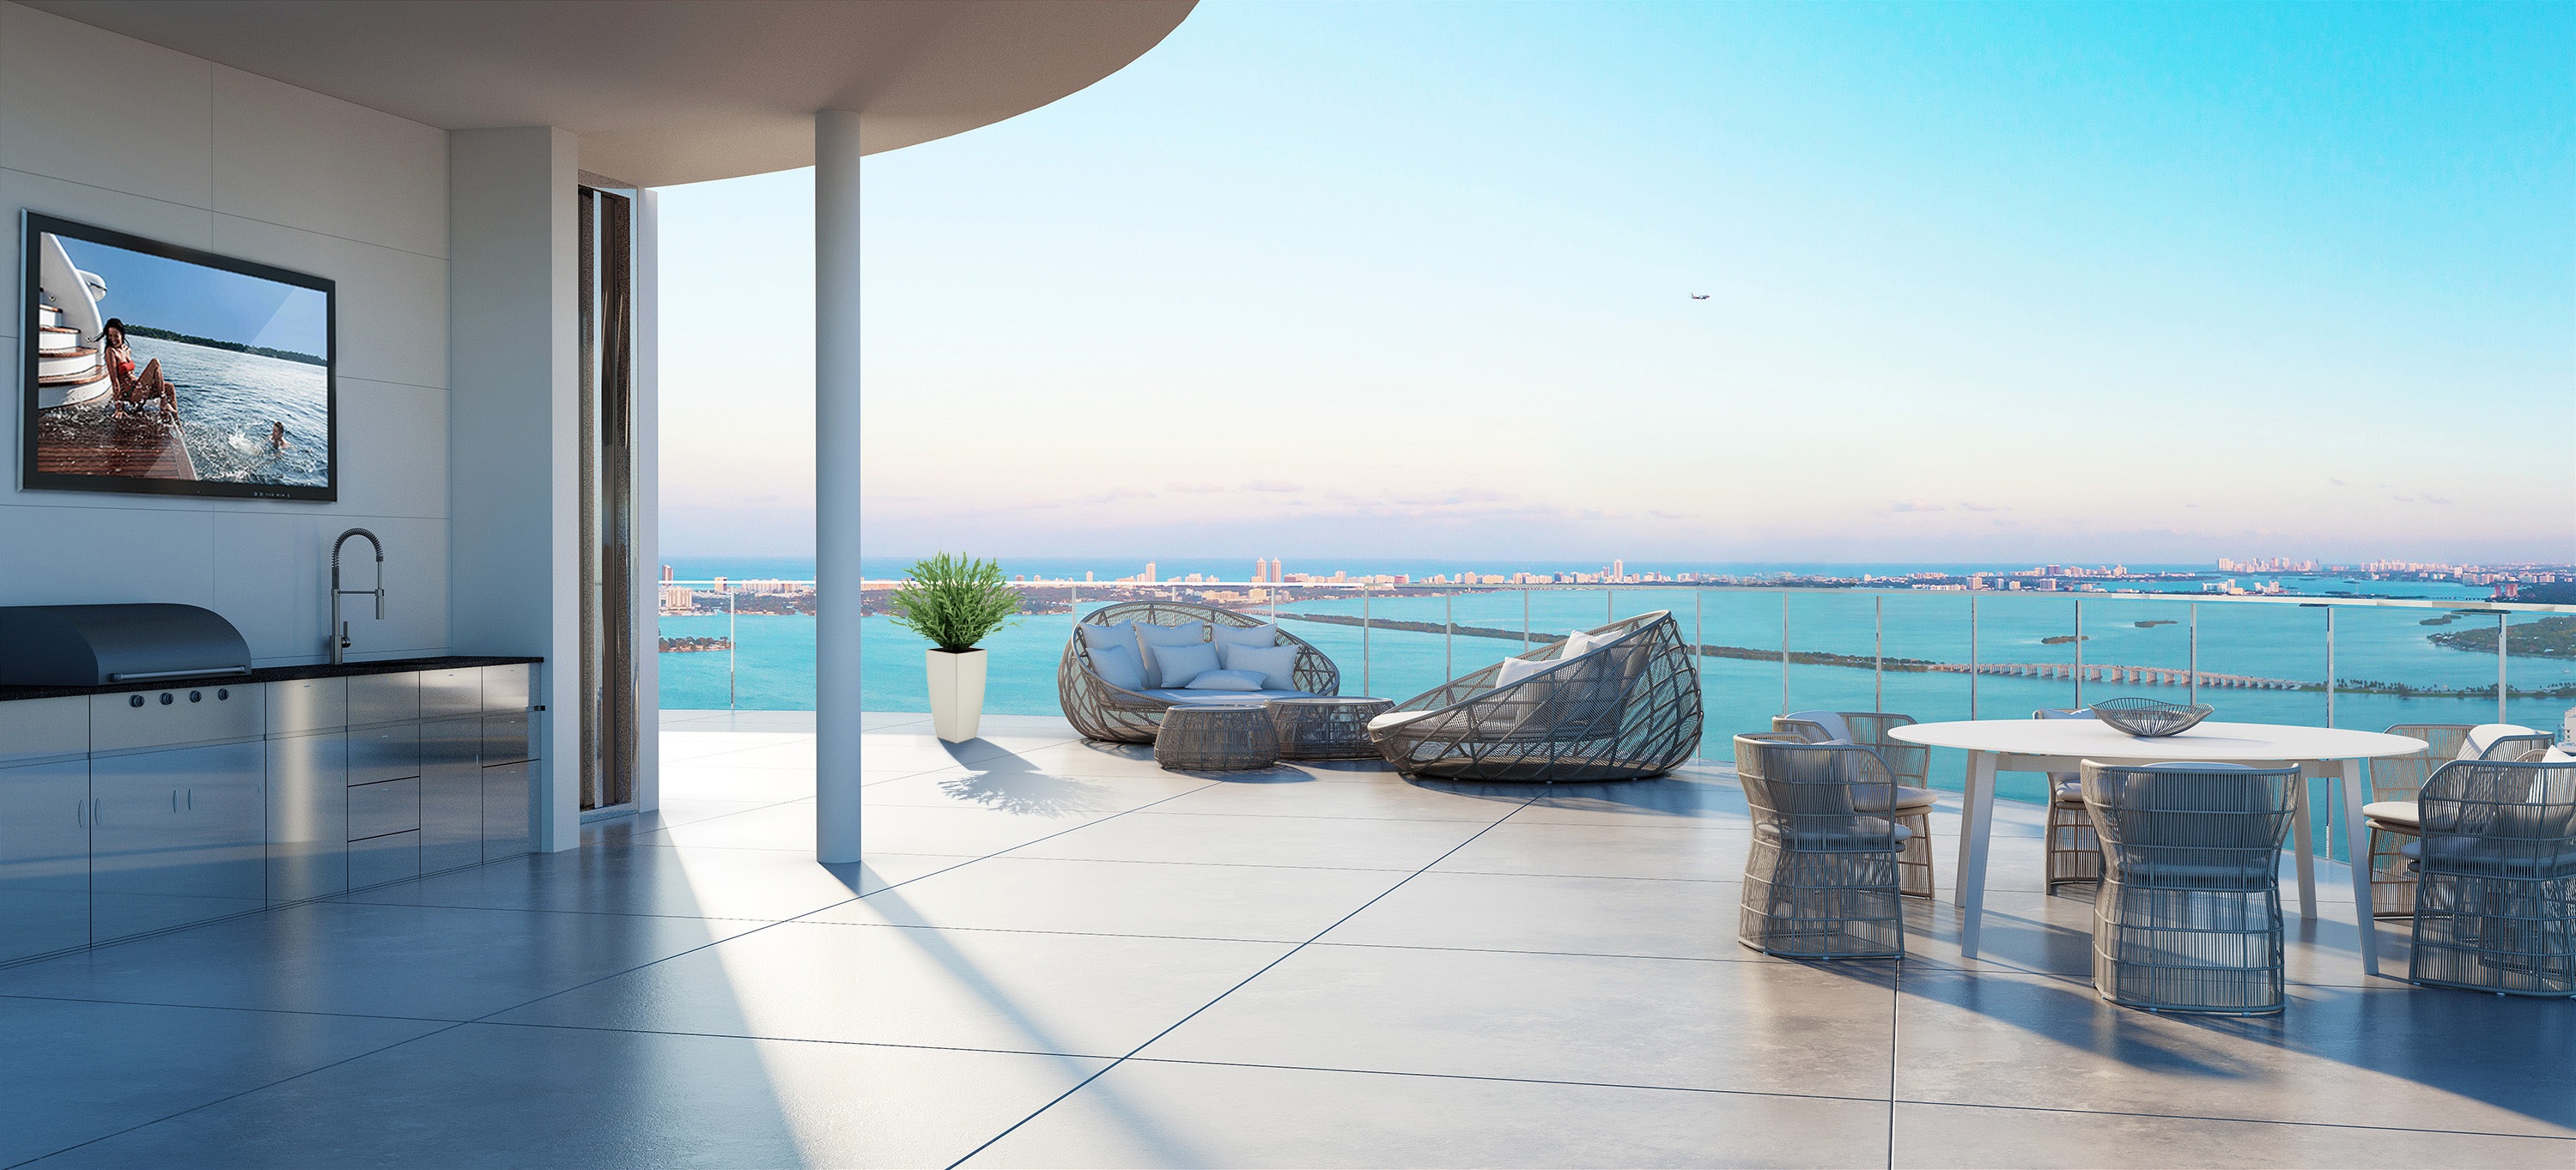 A rendering of the Aria on the Bay penthouse’s rooftop terrace